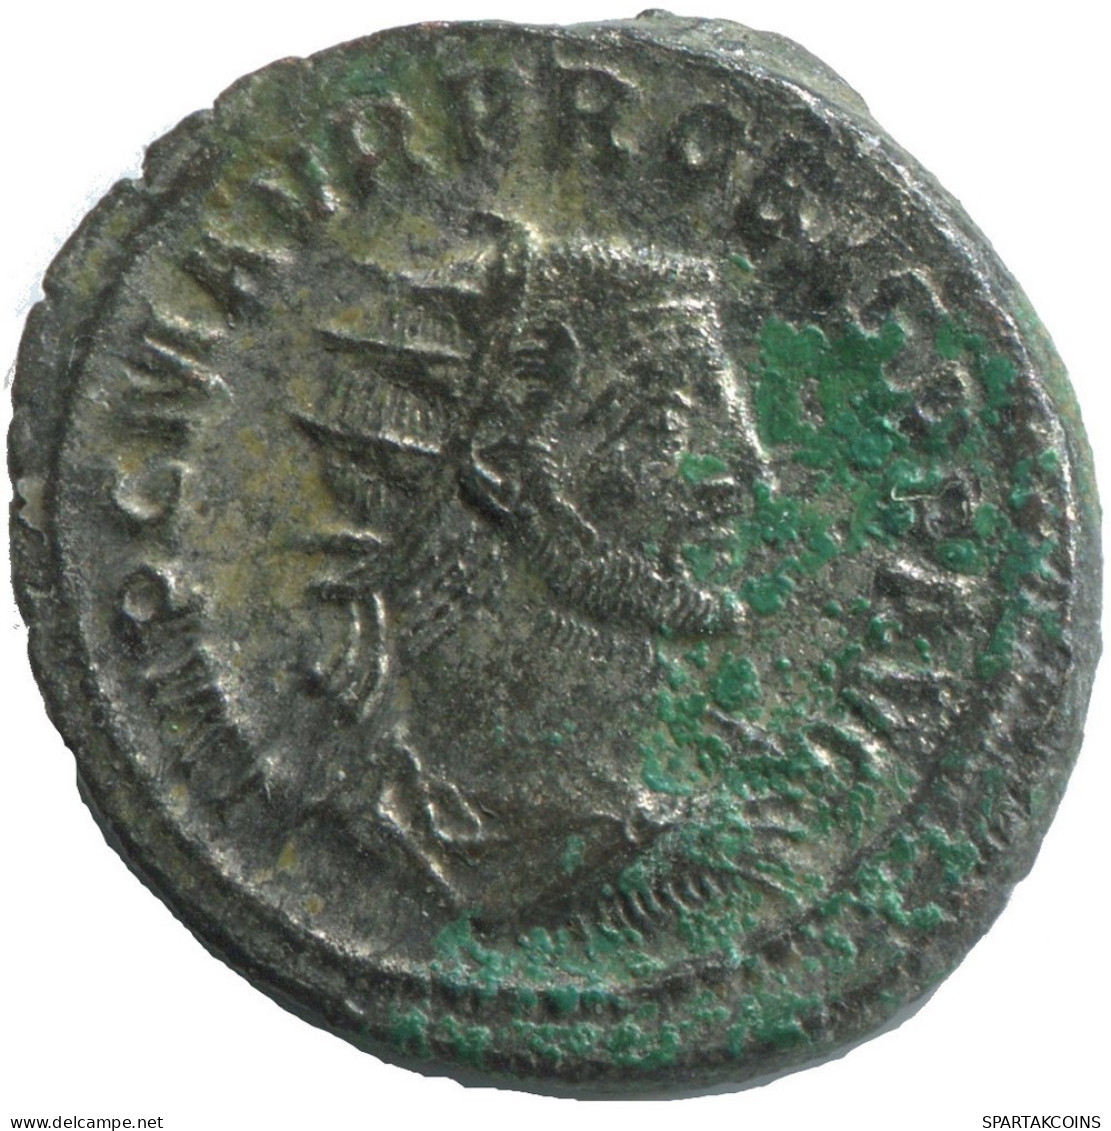 PROBUS ANTIOCH Г XXI AD276-282 SILVERED LATE ROMAN Moneda 4.3g/23mm #ANT2693.41.E.A - The Military Crisis (235 AD Tot 284 AD)